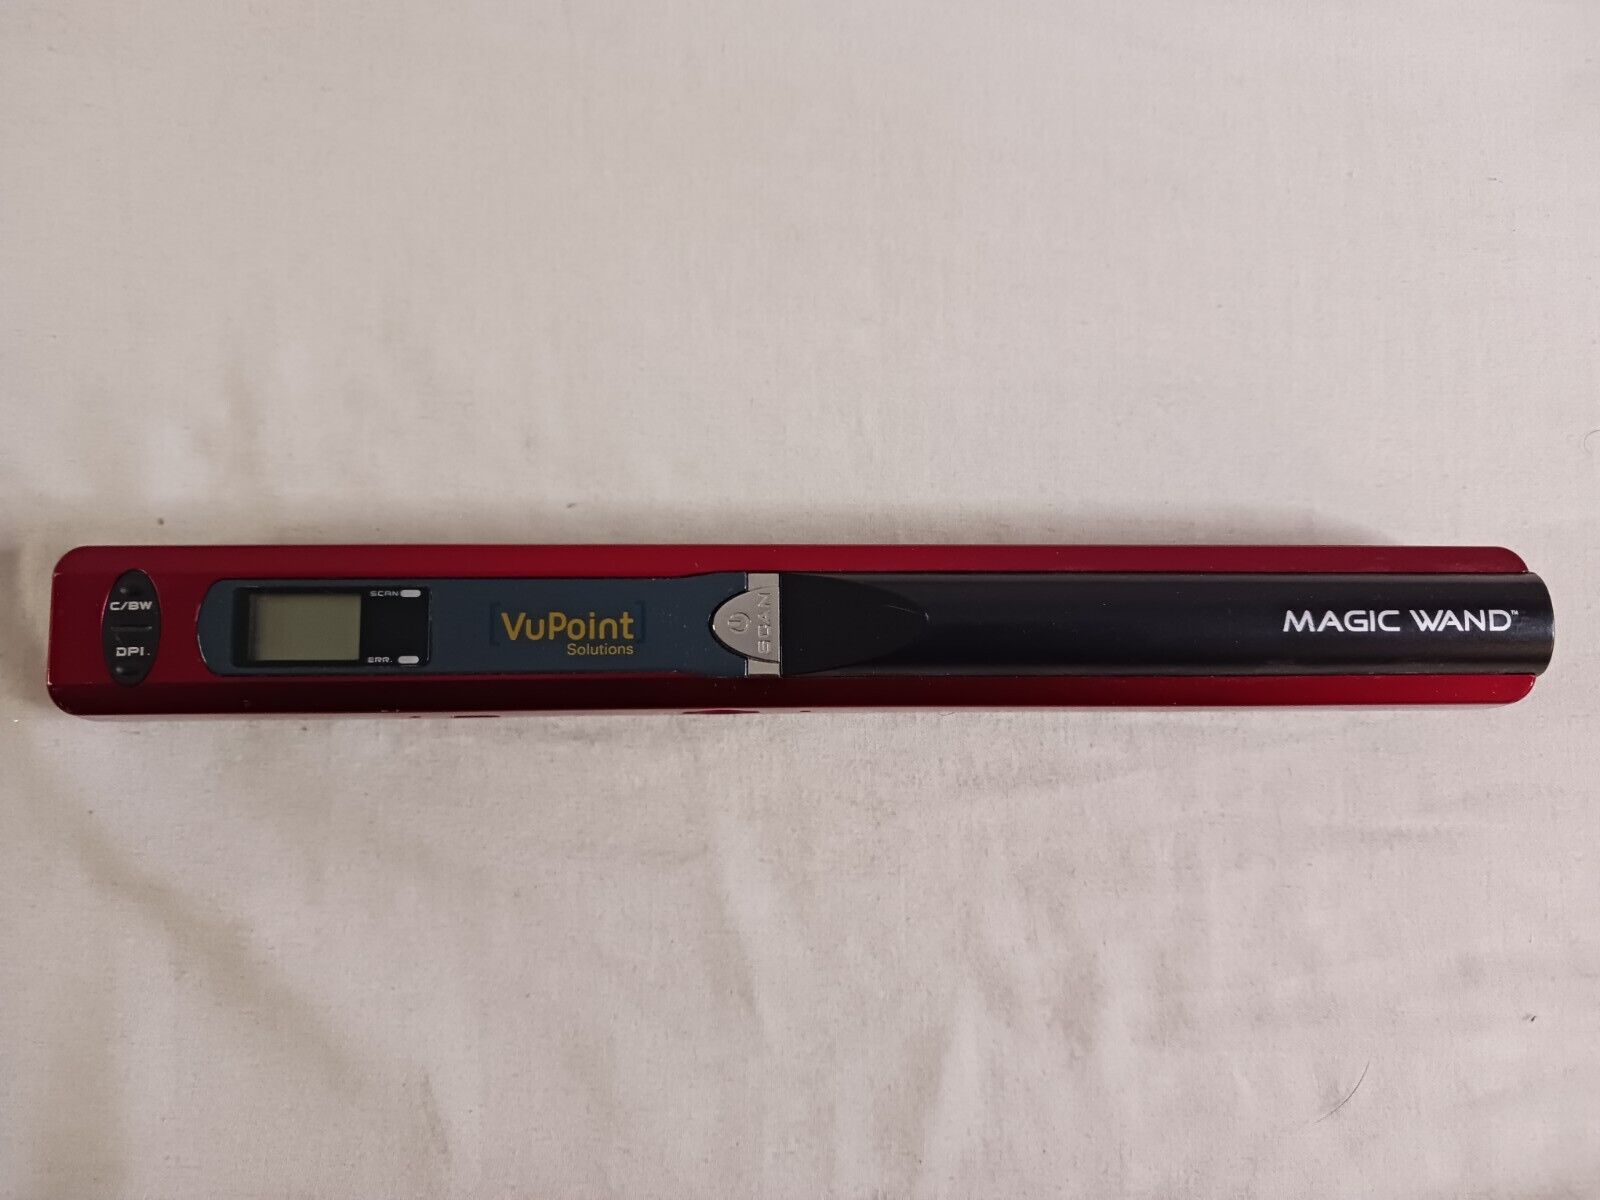 VuPoint Solutions Magic Wand Portable Scanner, Red, ST415R